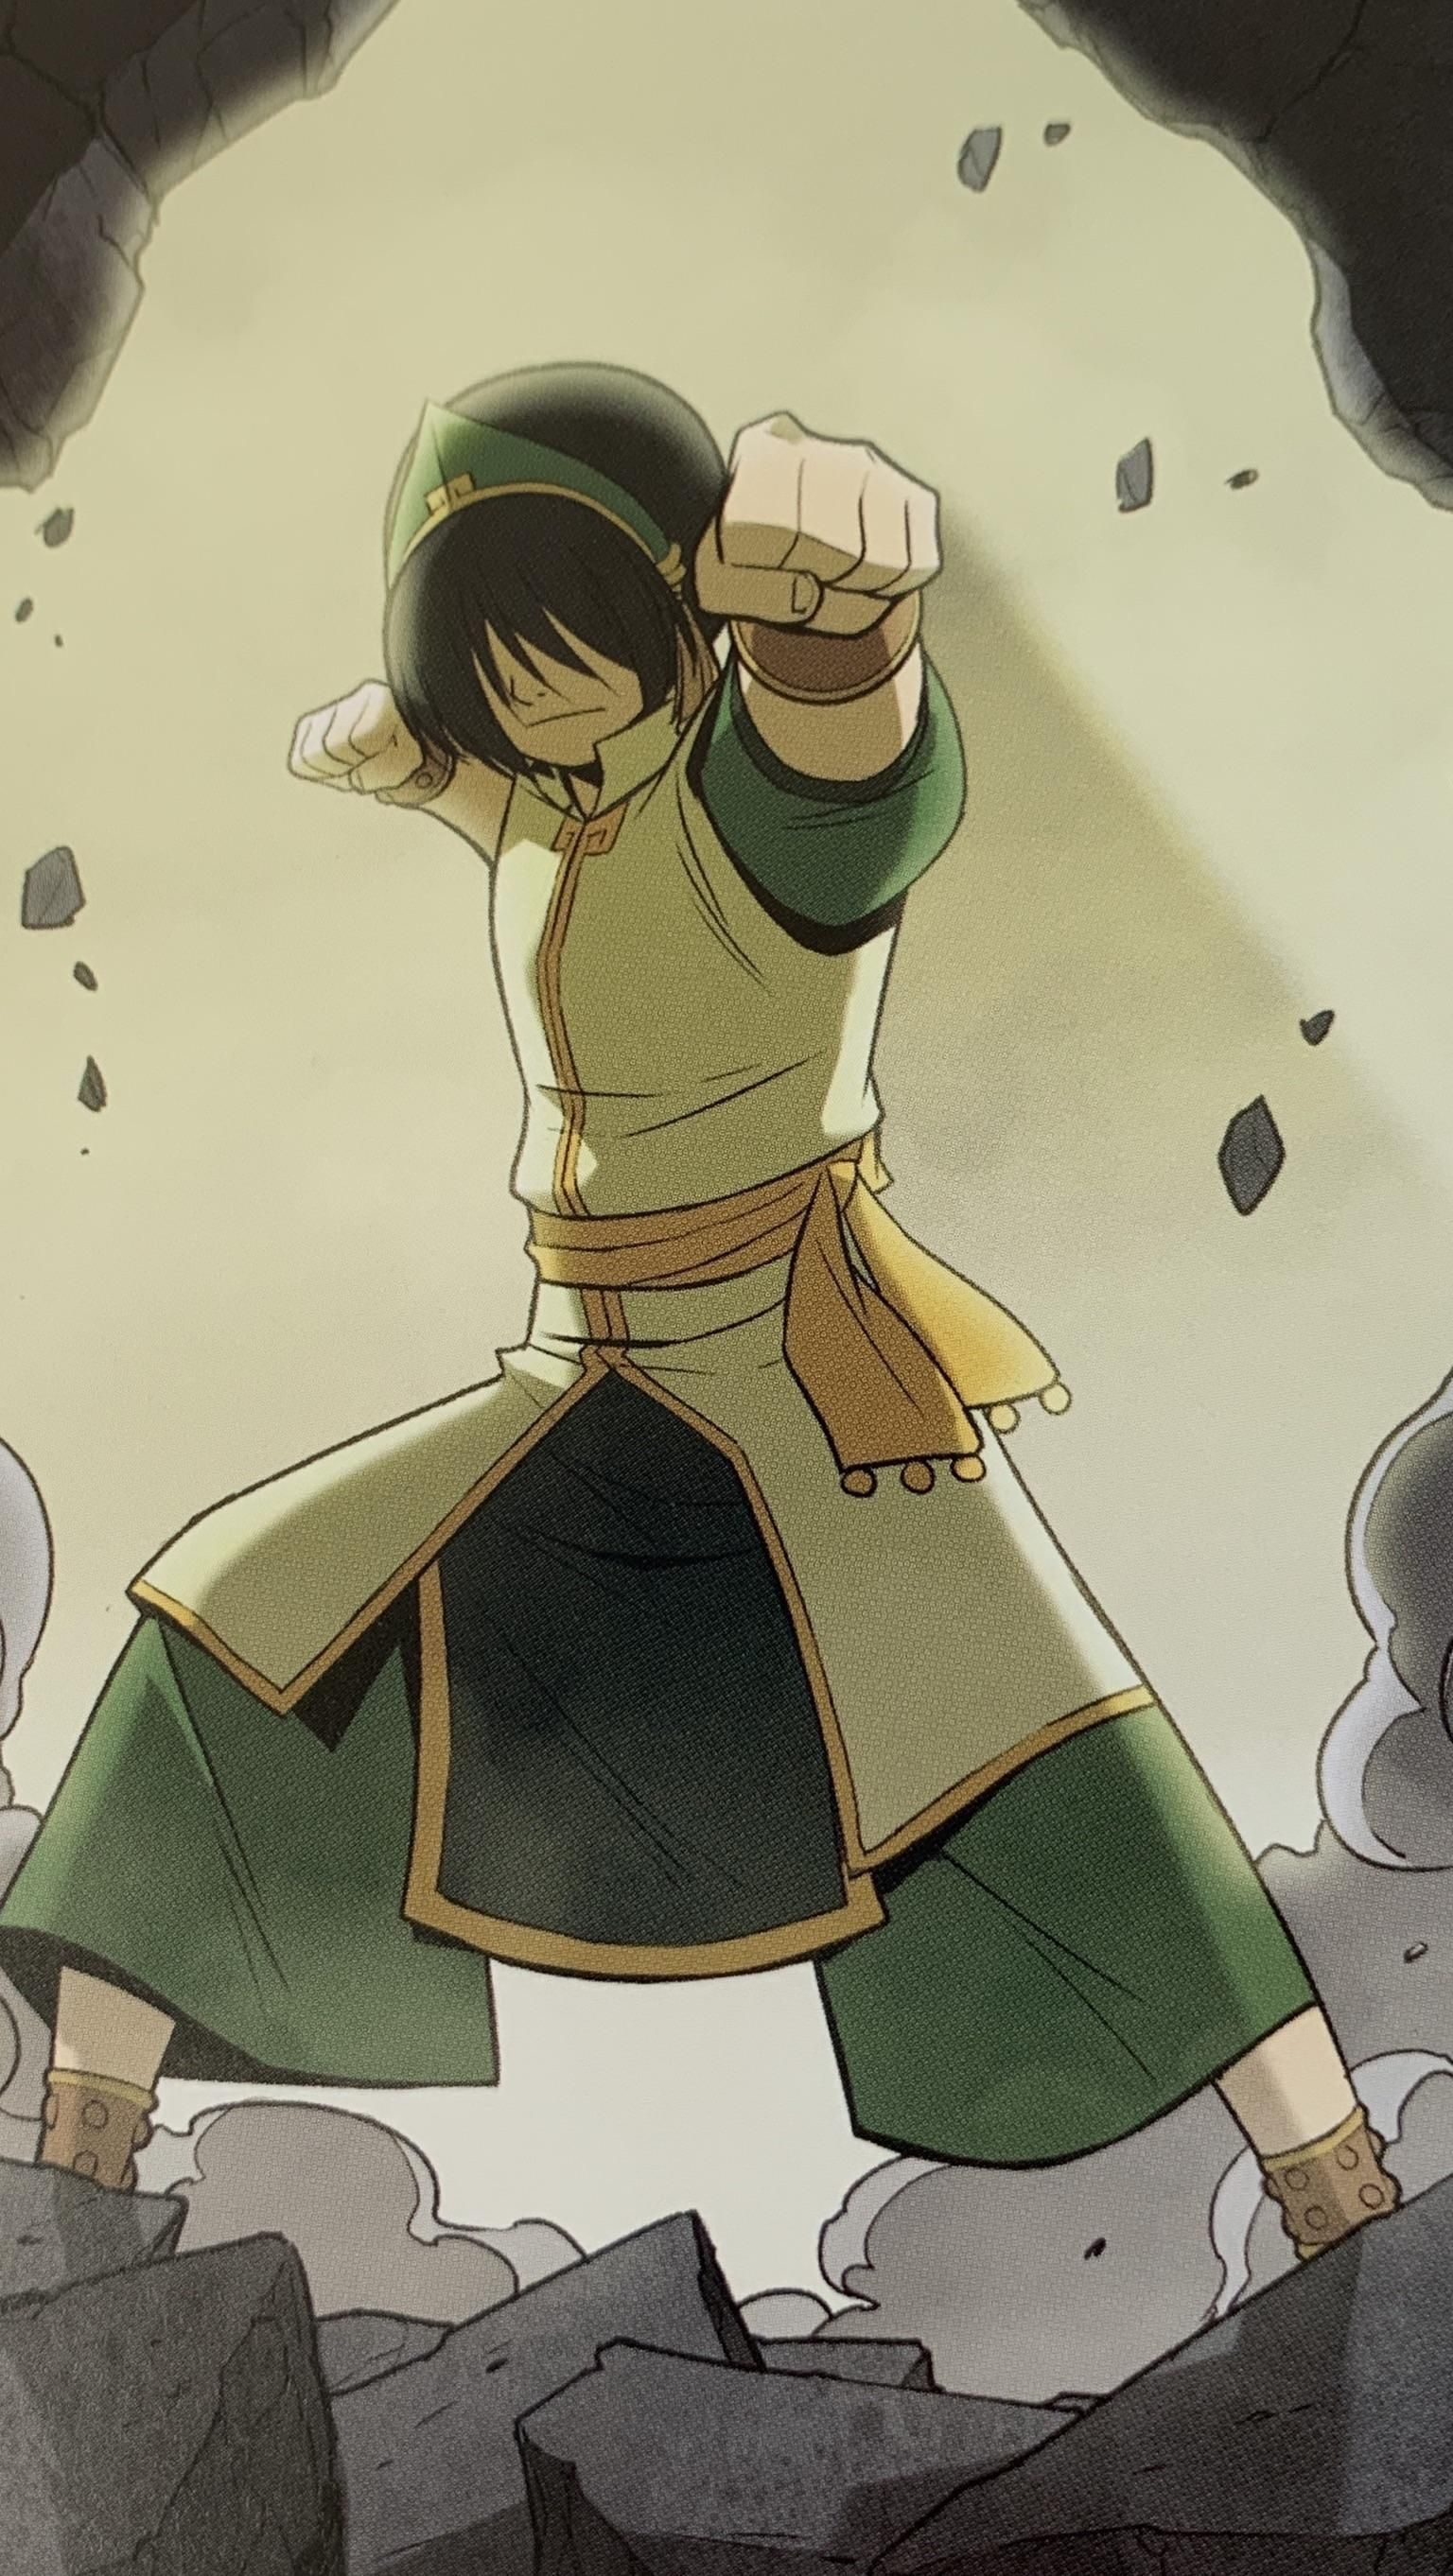 1536x2724 One of my favorite Toph poses from the comics : TheLastAirbender | Avatar cartoon, Avatar characters, Avatar airbender